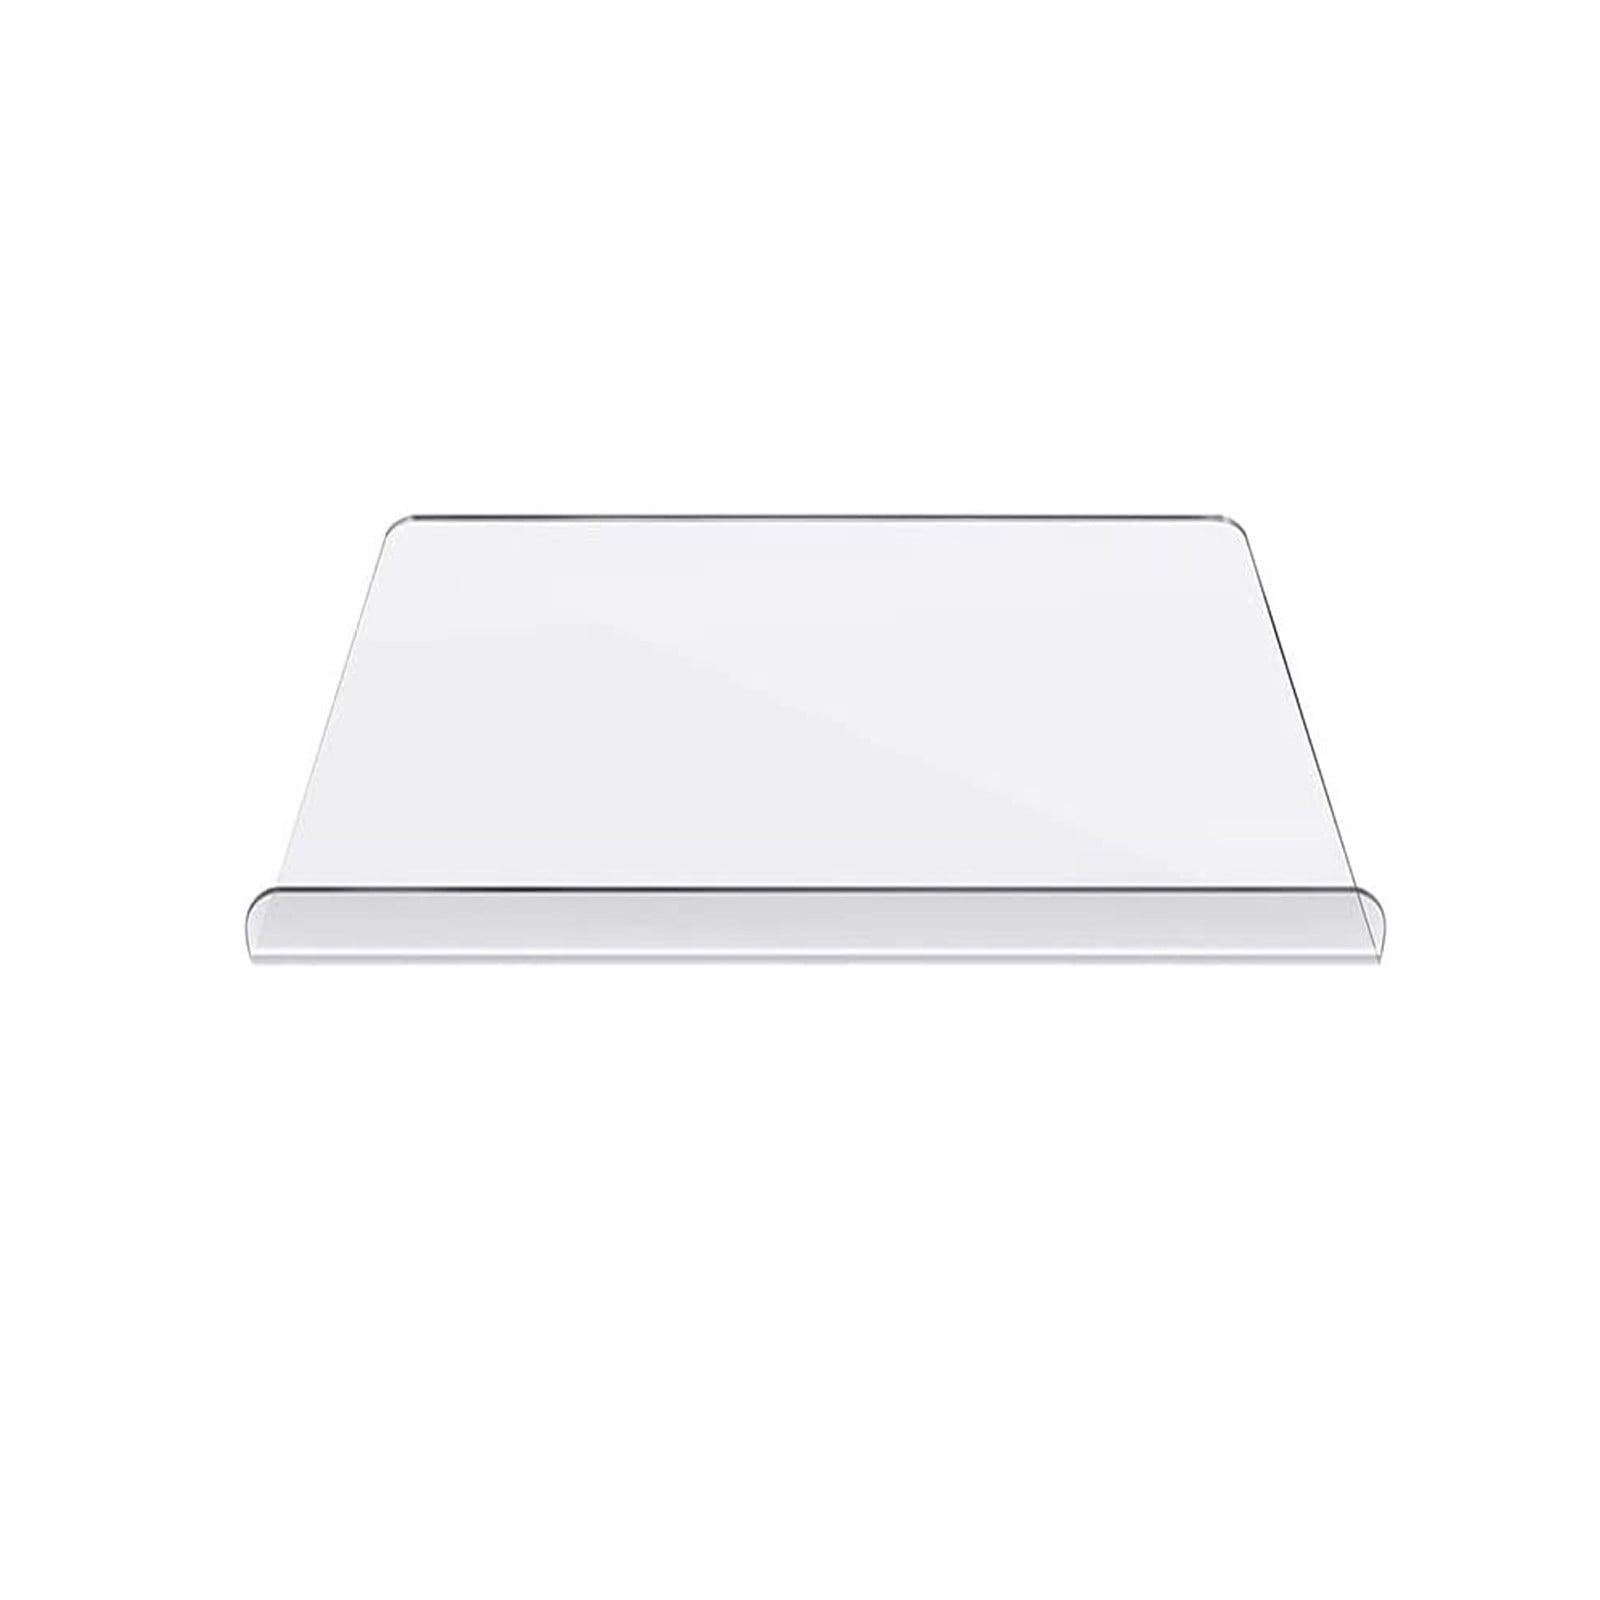 SWSKR Acrylic Cutting Board with Counter Lip,18x14 Large Clear Cutting  Board for Kitchen Countertop,Non-Slip,60% Thicker,Perfect for